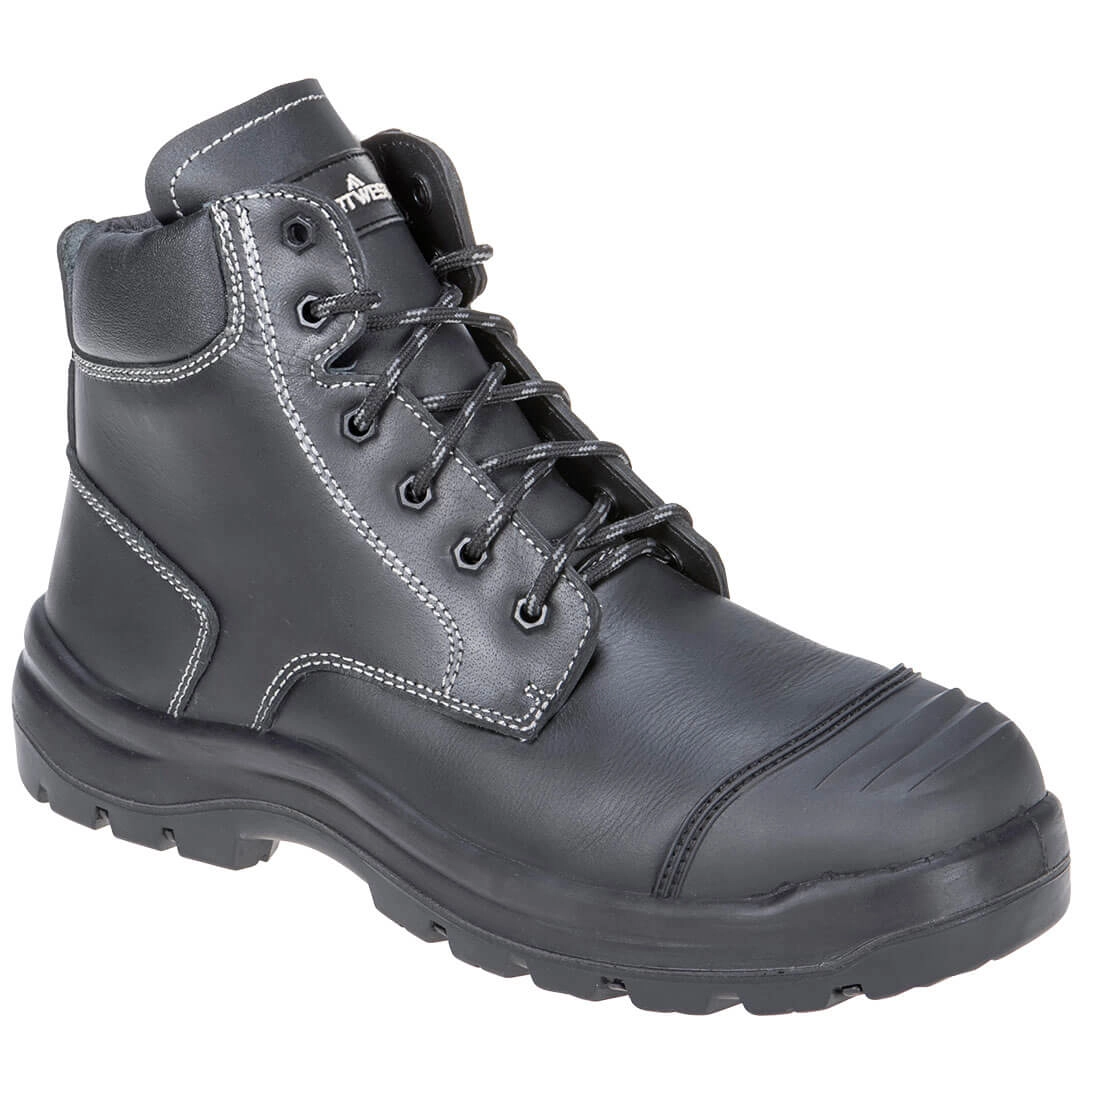 Clyde Safety Boot S3 HRO CI HI FO